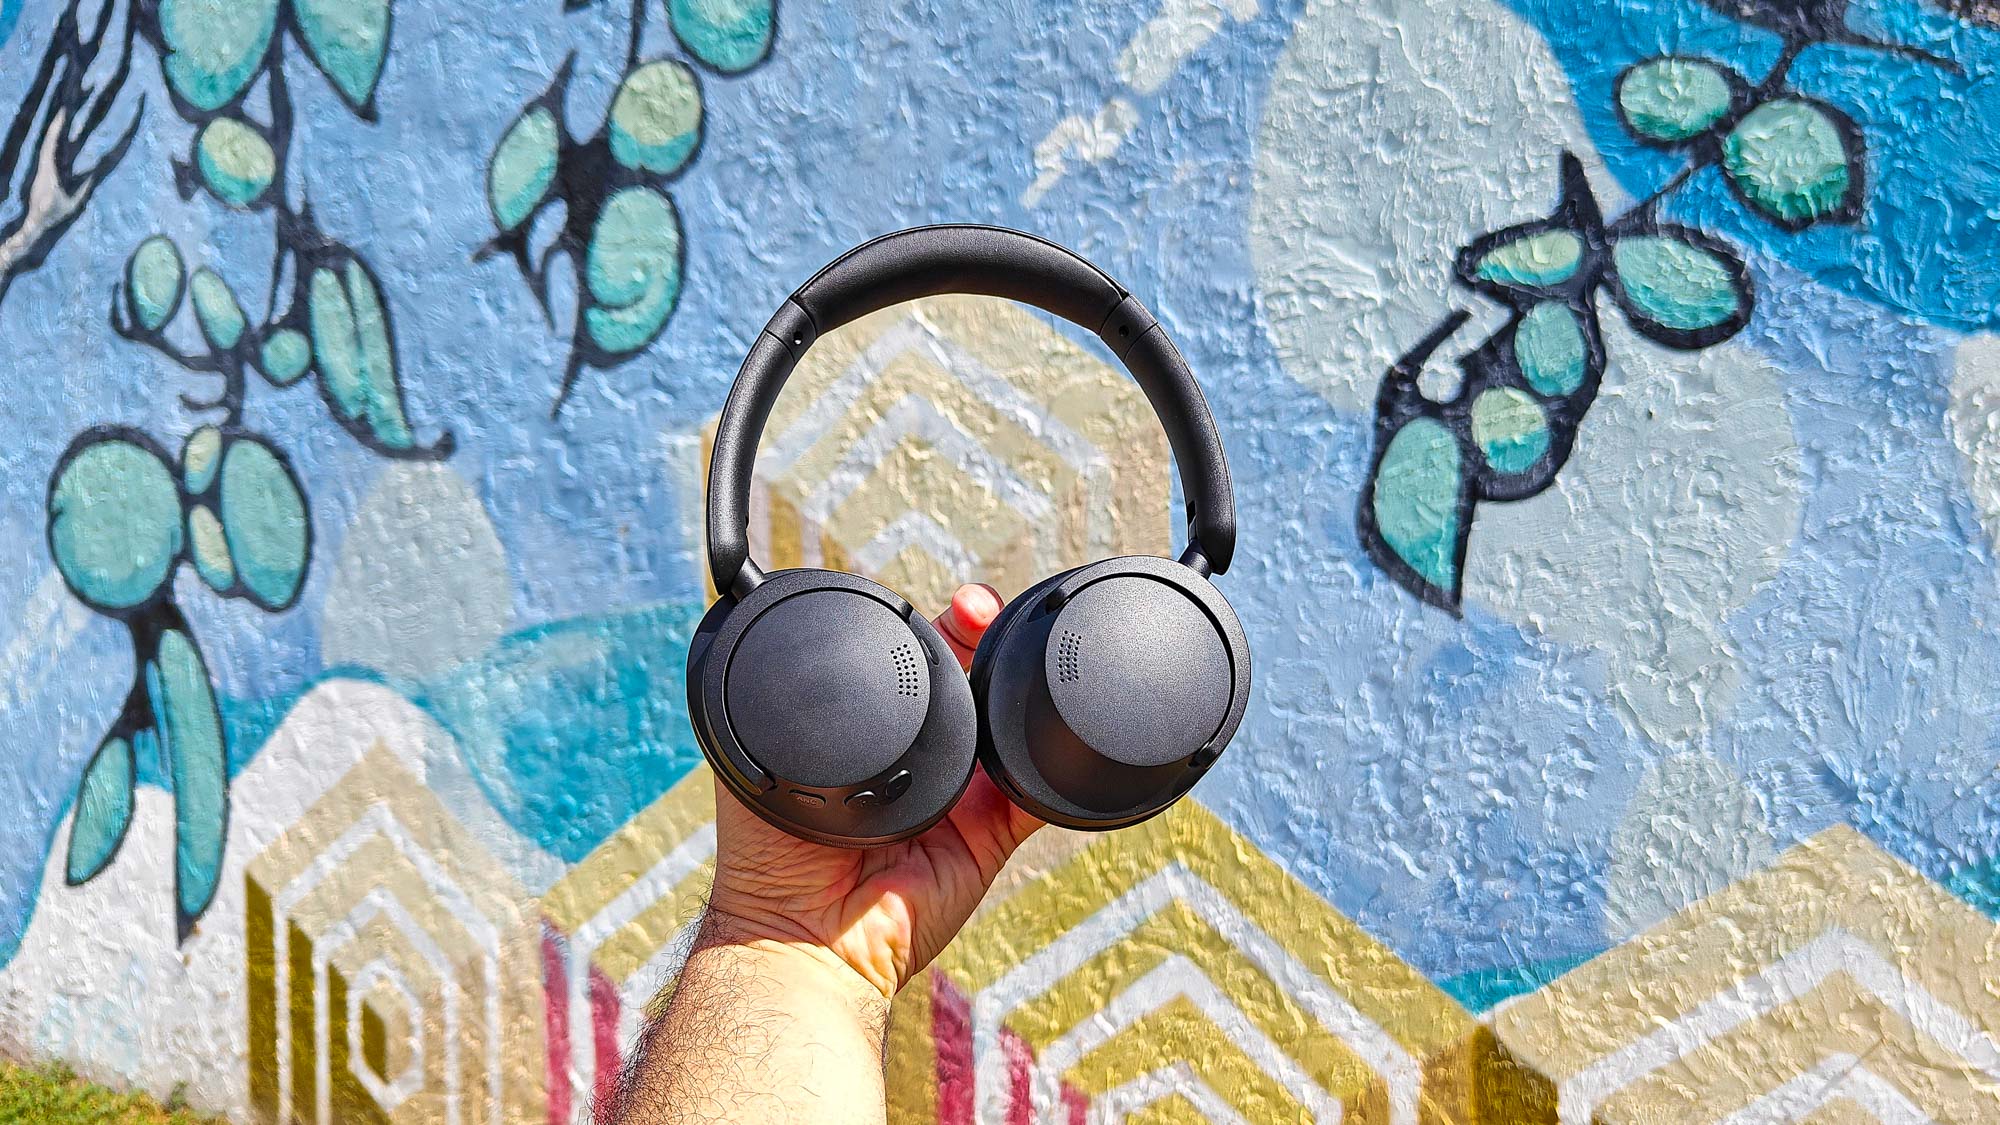 Original 1MORE SonoFlow Wireless Bluetooth Hybrid ANC Headphones, Hi-Res  LDAC AAC 12 EQ, 70H Battery, Connect 2 Devices, 5 Microphones